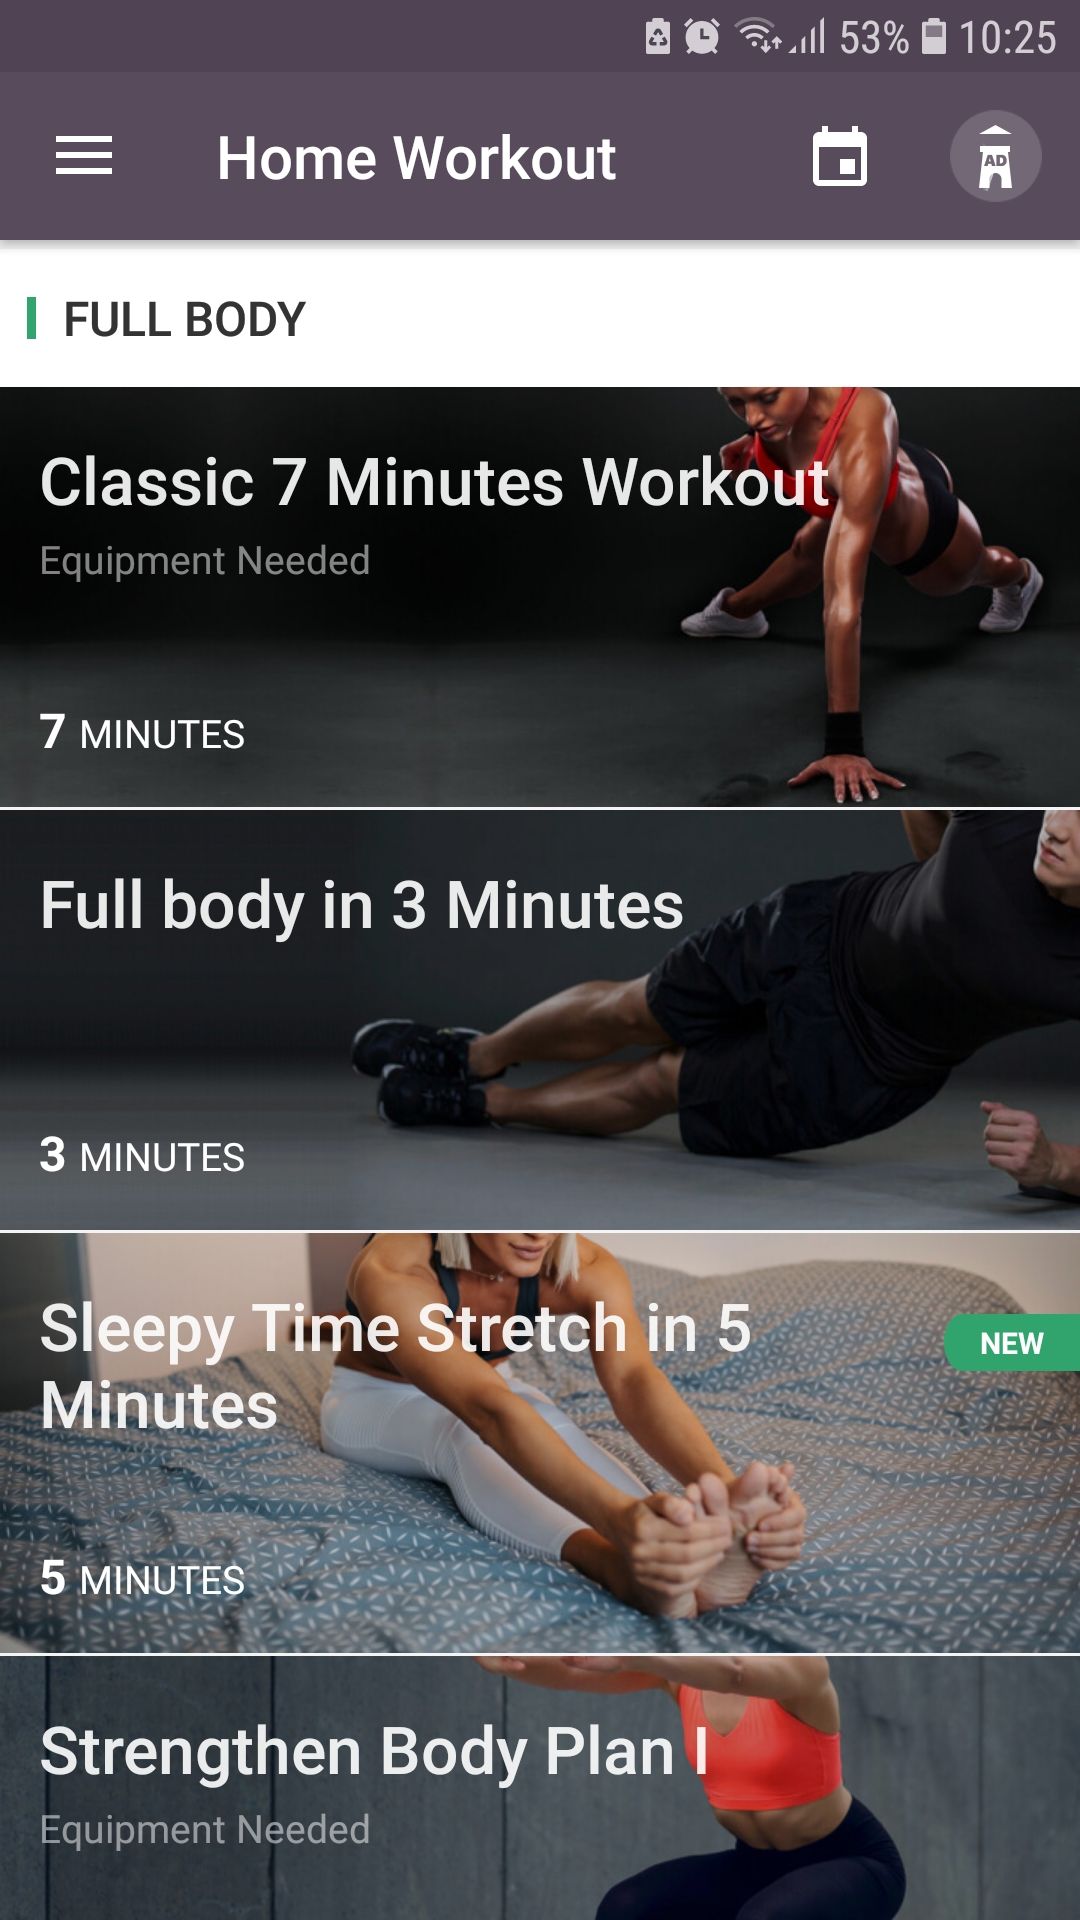 Home workout mobile fitness app full body